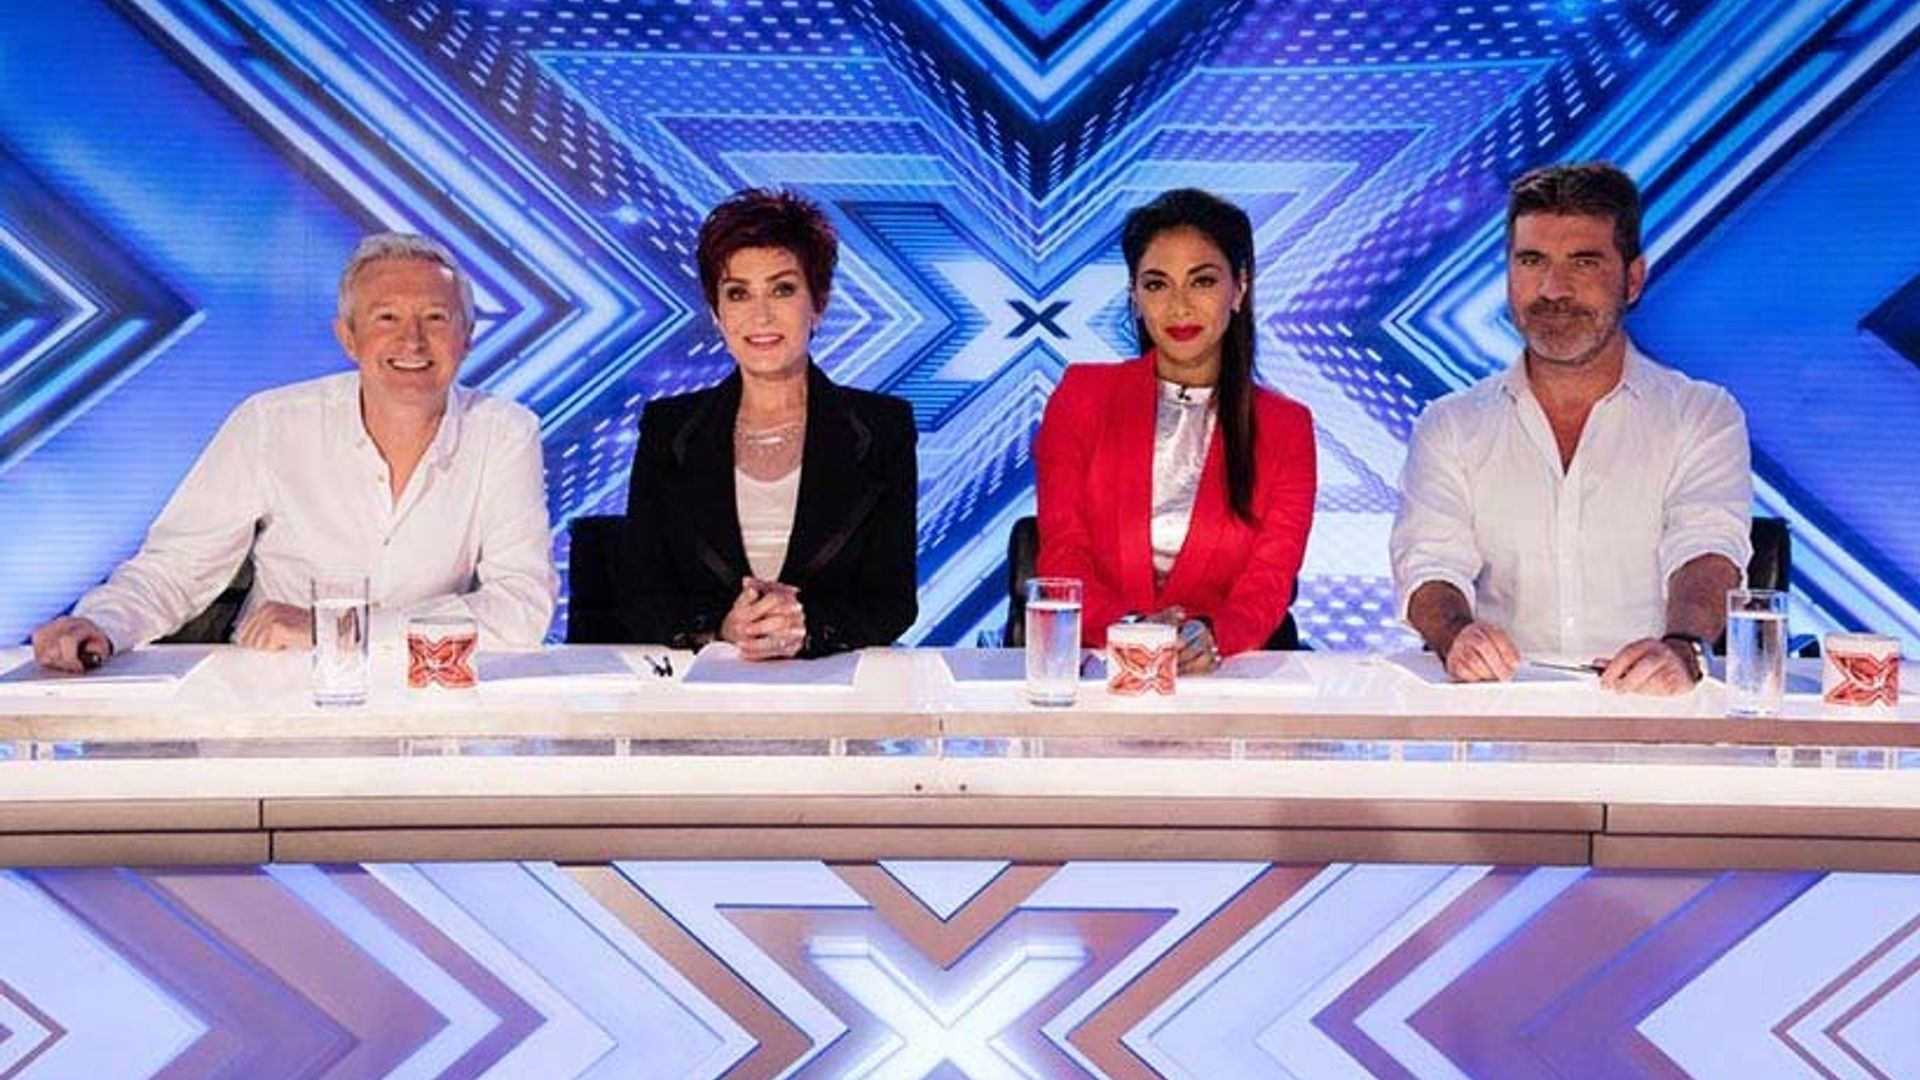 Watch: X Factor judges past and present star in new promo